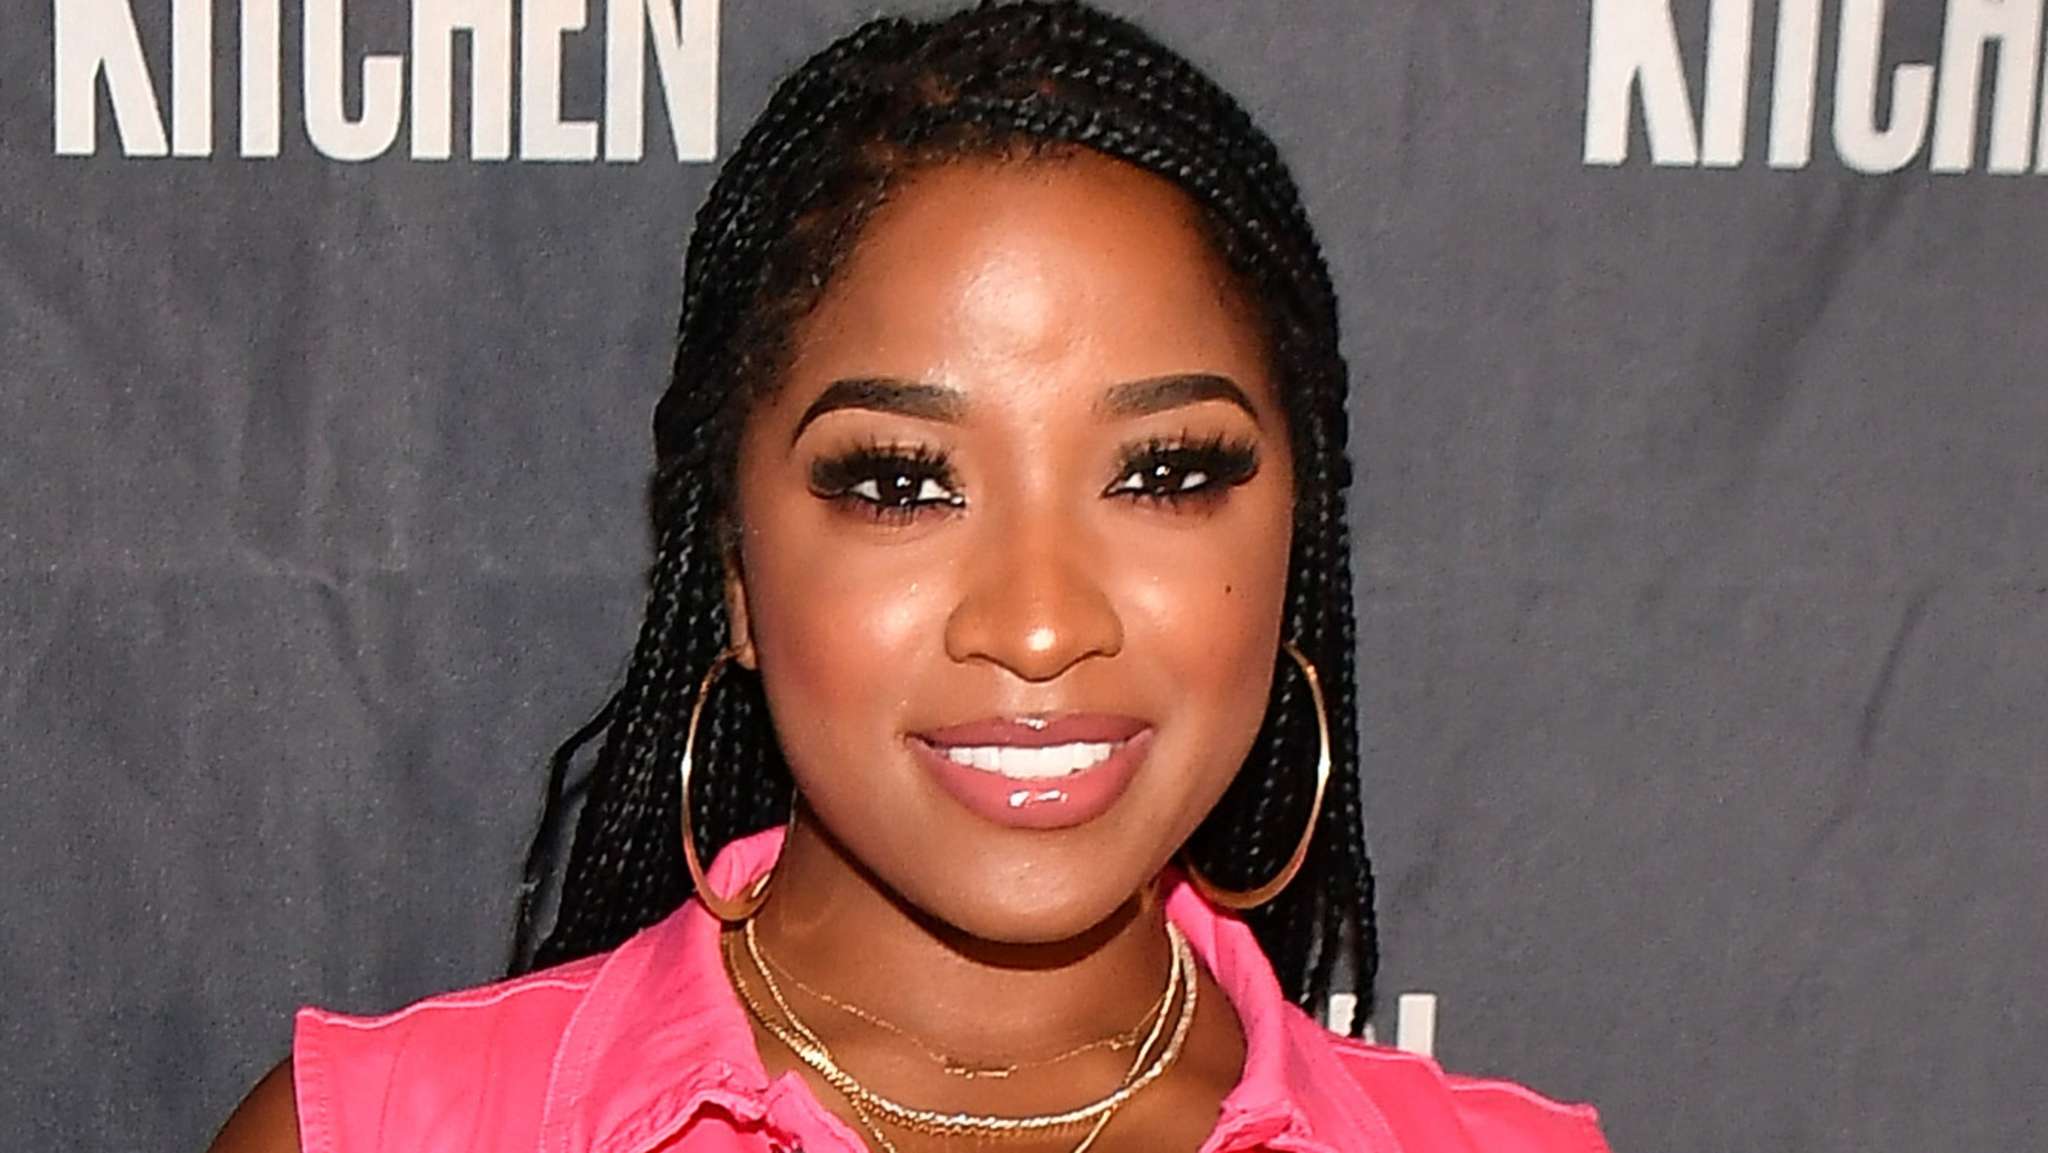 Toya Johnson Talks About Her Hair Growth Journey To Restore Her Edges - See The Video